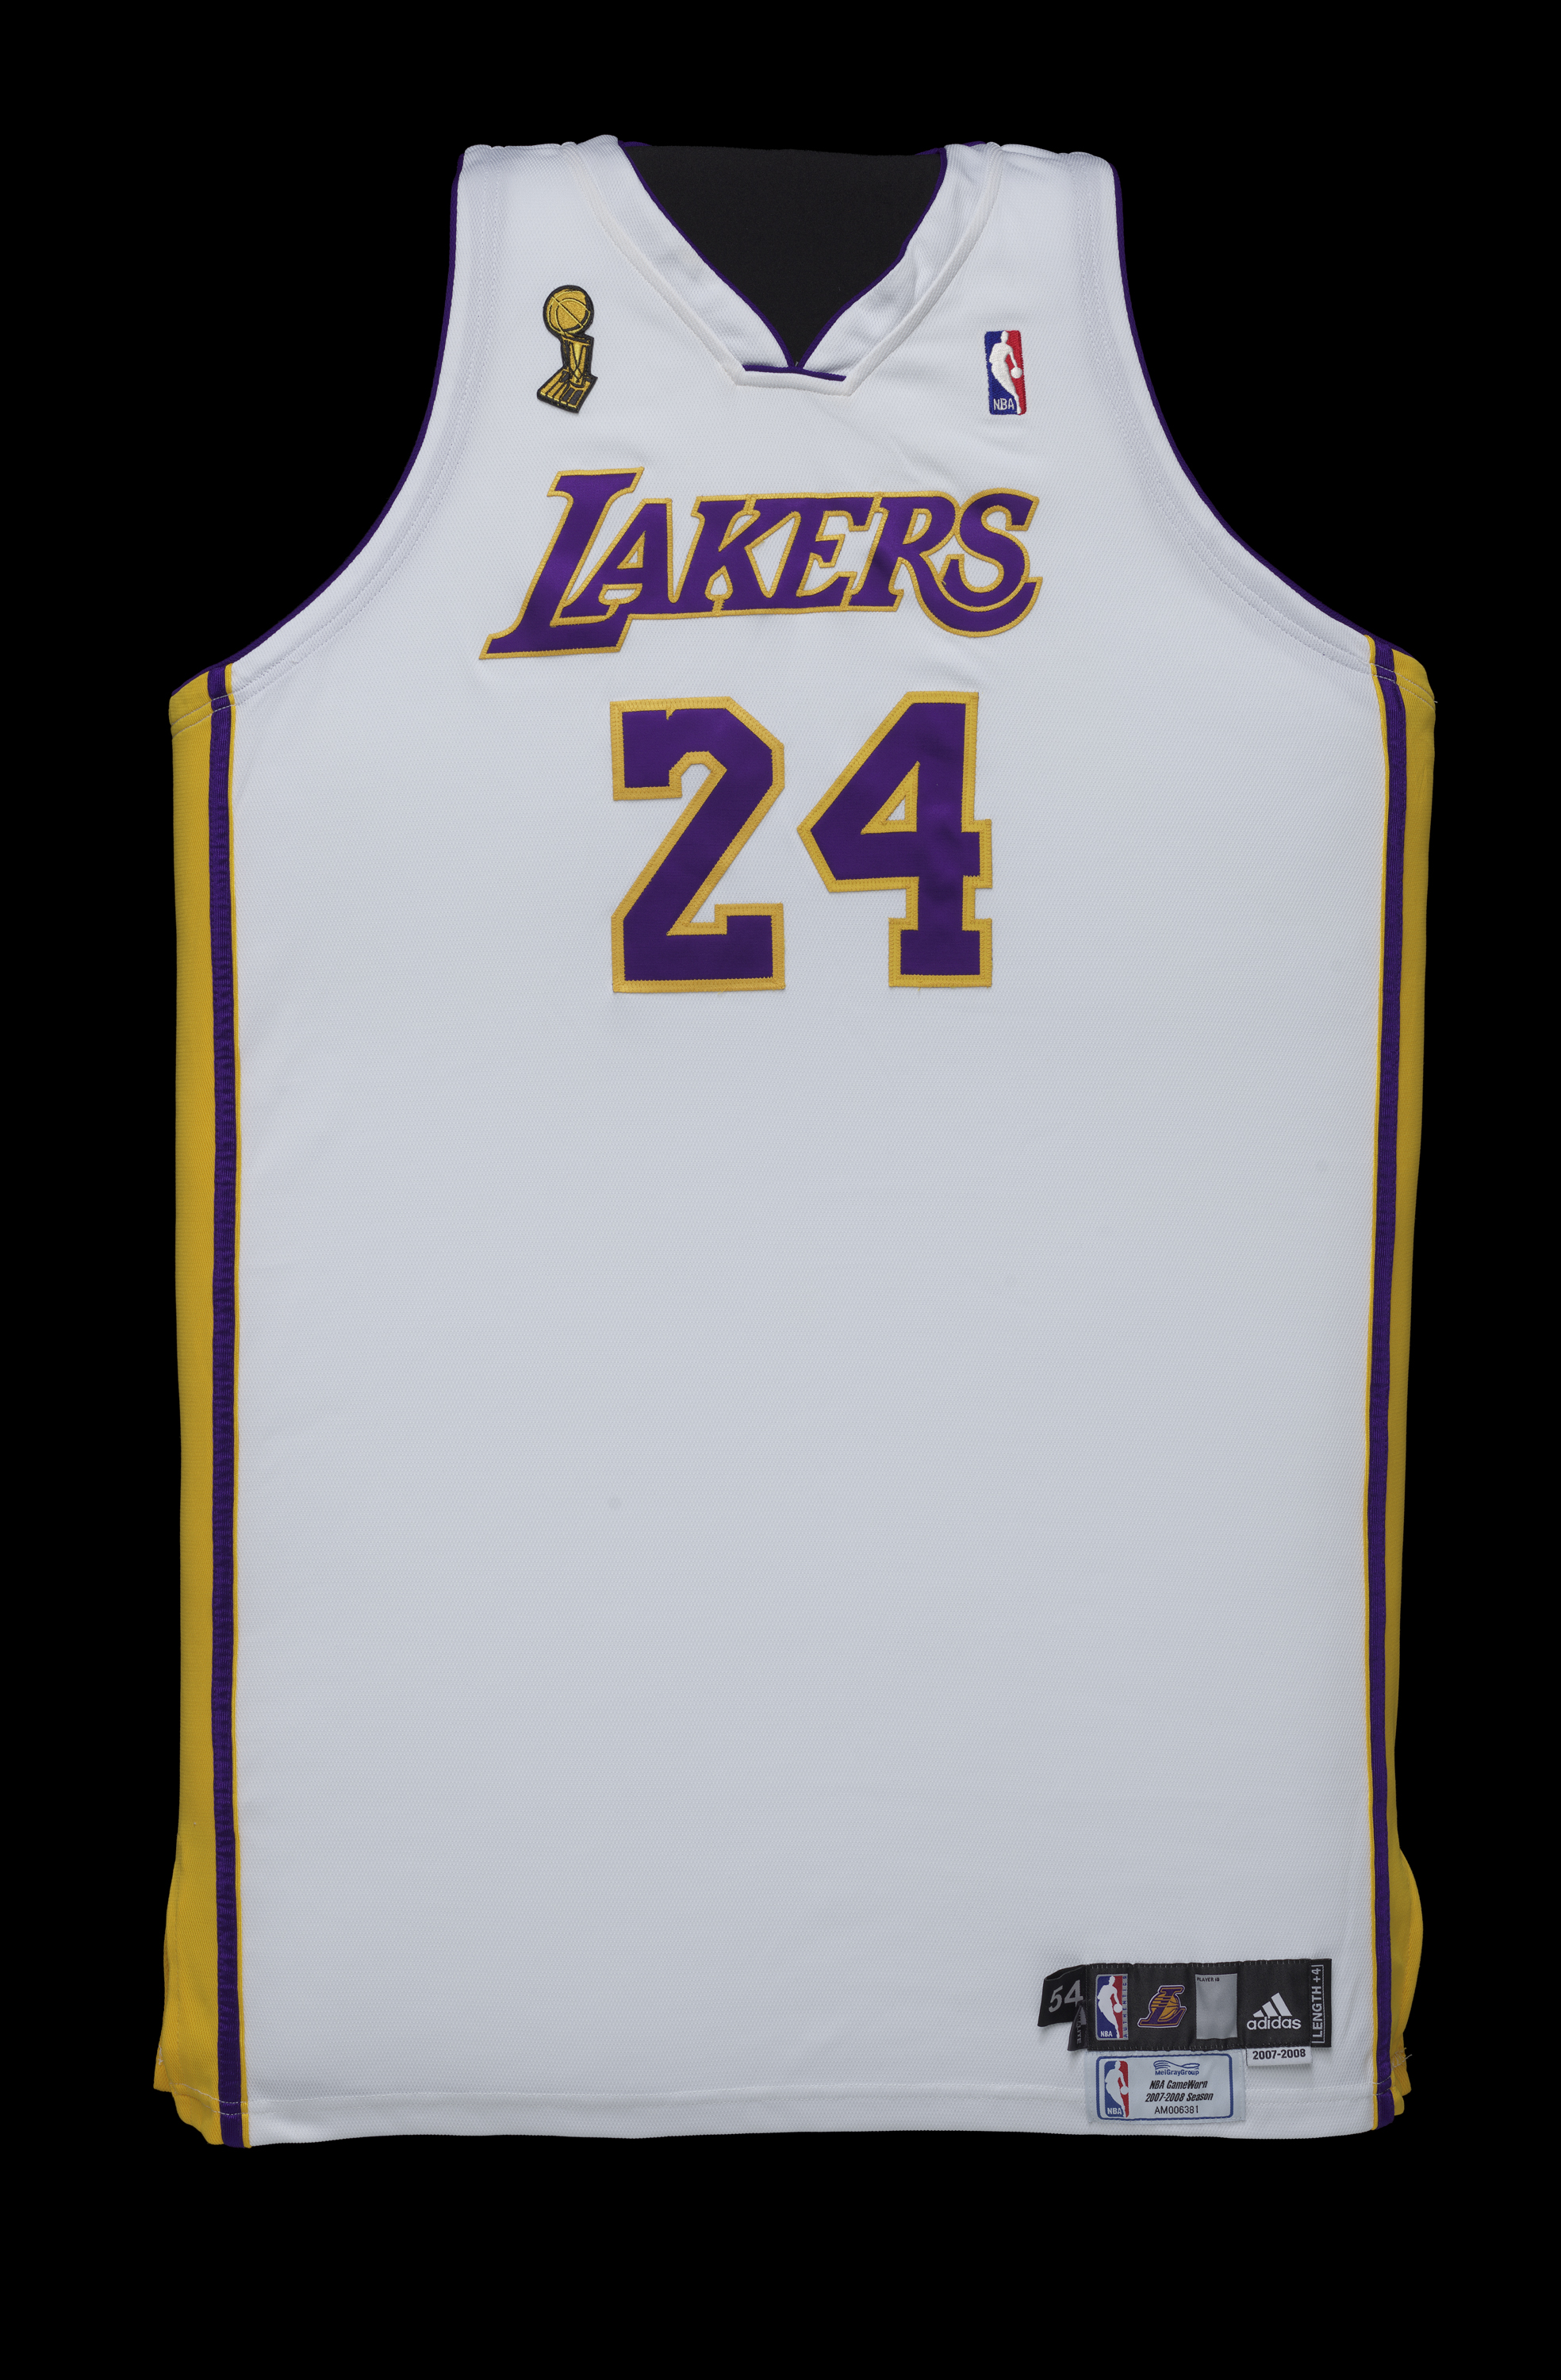 4 lakers jersey